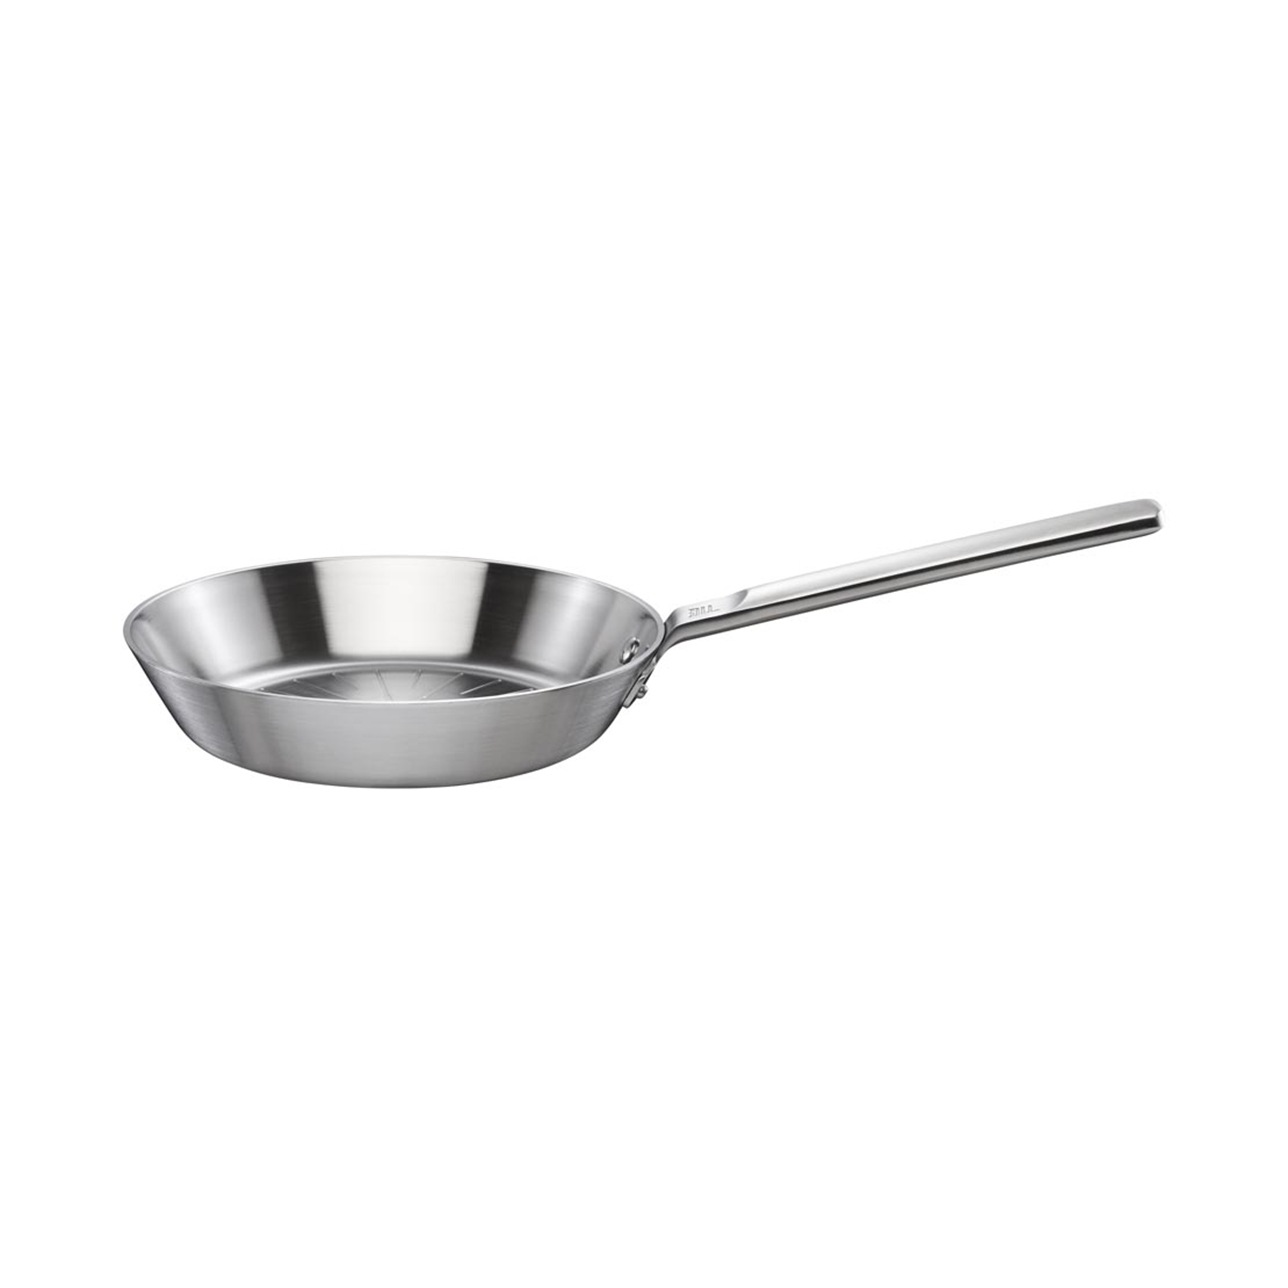 Norden Frying Pan Uncoated Stainless Steel, 24 cm